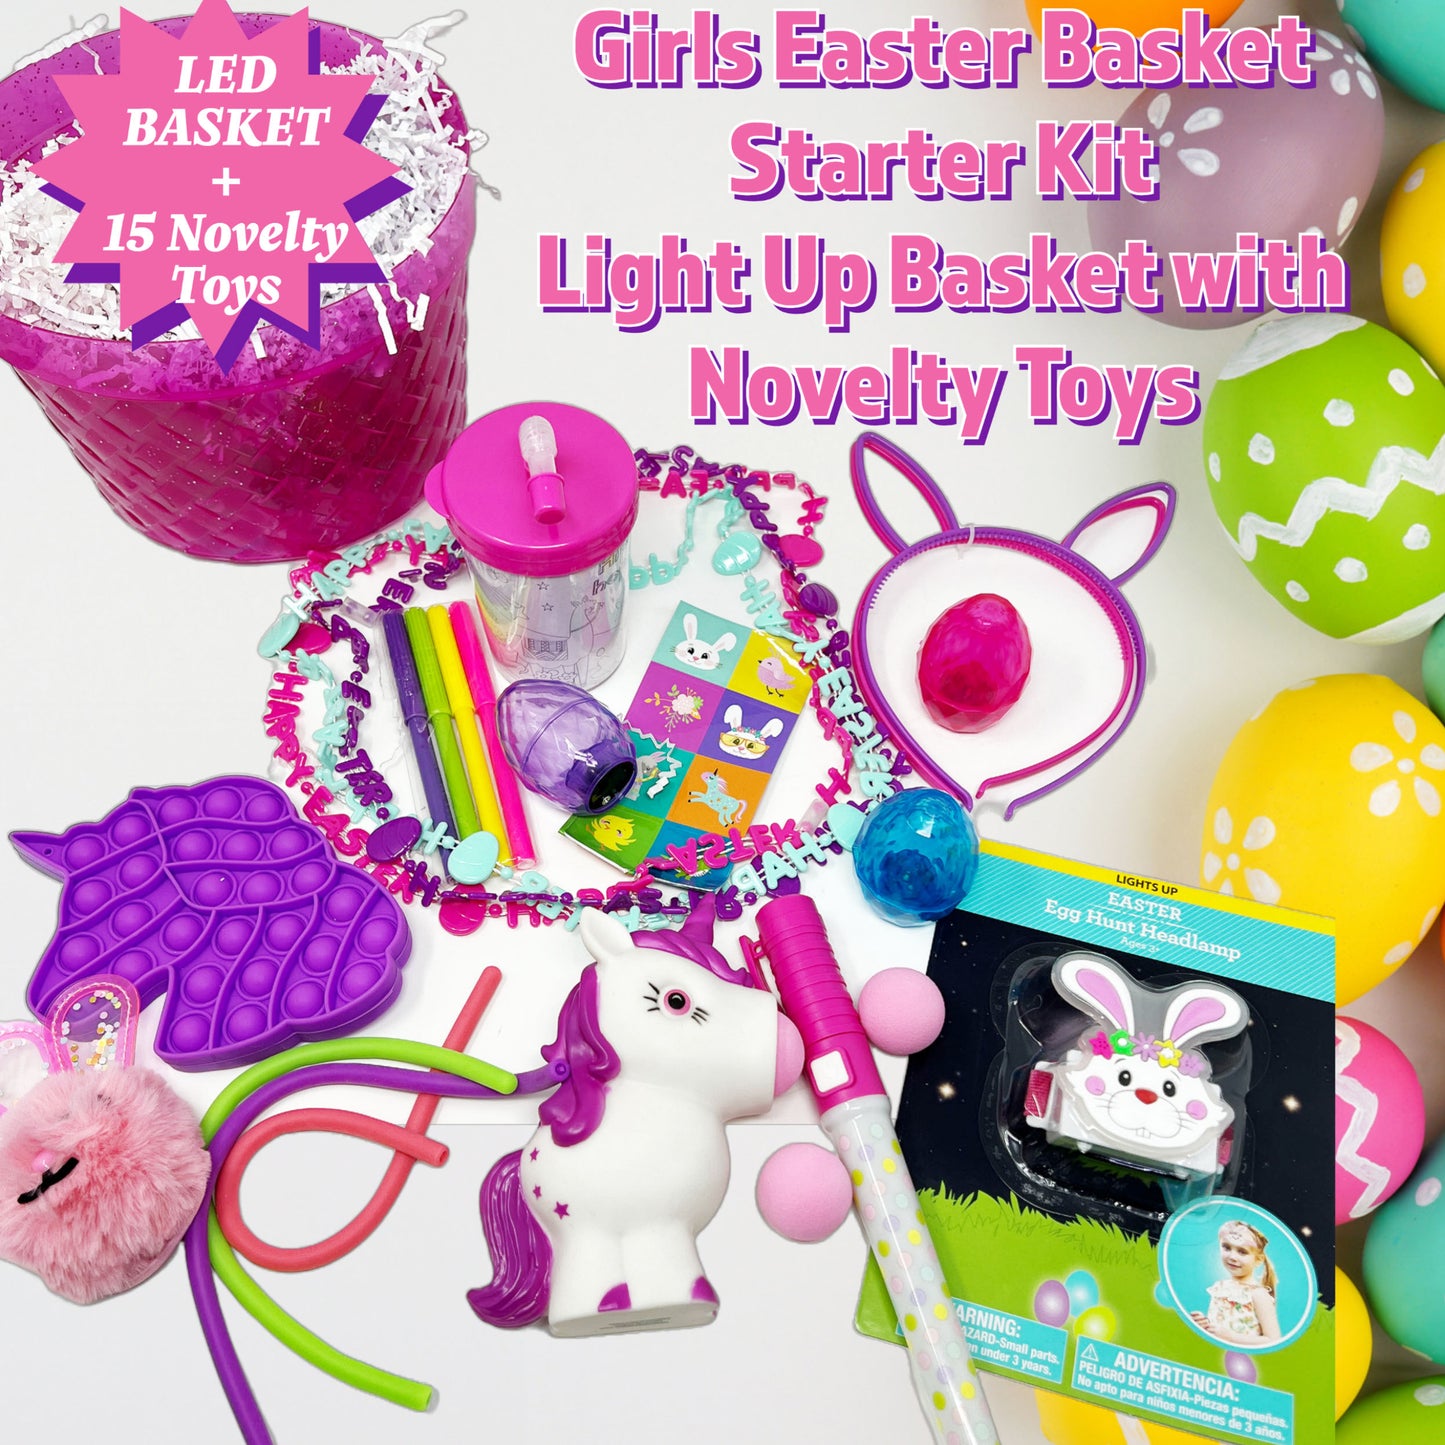 Cheep N Cheerful Deluxe Build a Basket Girl Novelty Toys, LED Easter Basket with Novelty Easter Toys, 16 Pcs